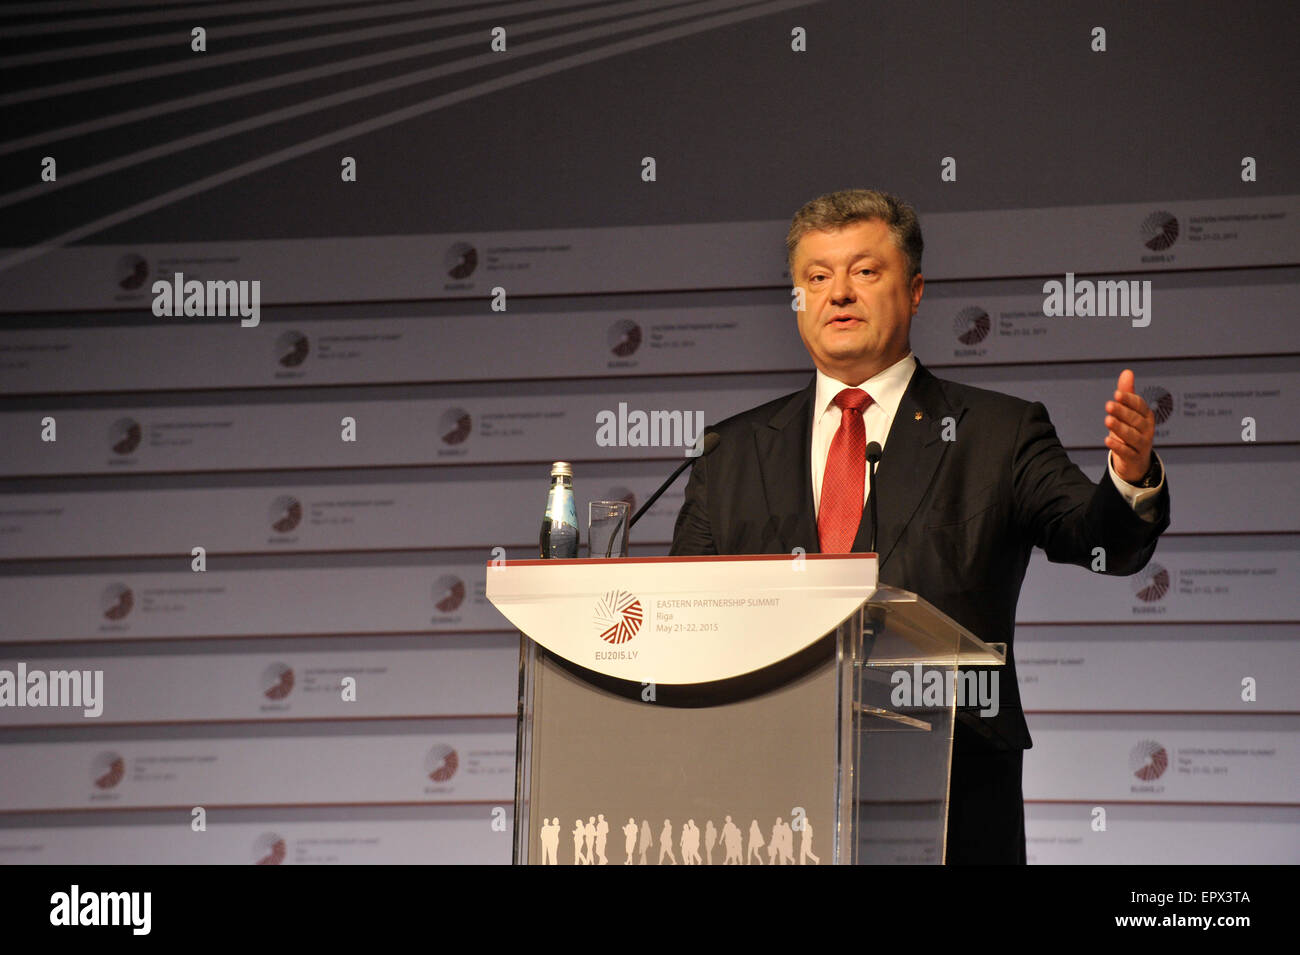 Riga, Latvia. 22nd May, 2015. Ukrainian President Petro Poroshenko speaks during a press conference of the Eastern Partnership Summit in Riga, capital of Latvia, on May 22, 2015. Representatives of the European Commission and Ukraine signed agreements on the European Union's new 1.8 billion euro (2.0 billion U.S. dollars) financial aid package for Ukraine during the Eastern Partnership Summit here on Friday. © Guo Qun/Xinhua/Alamy Live News Stock Photo